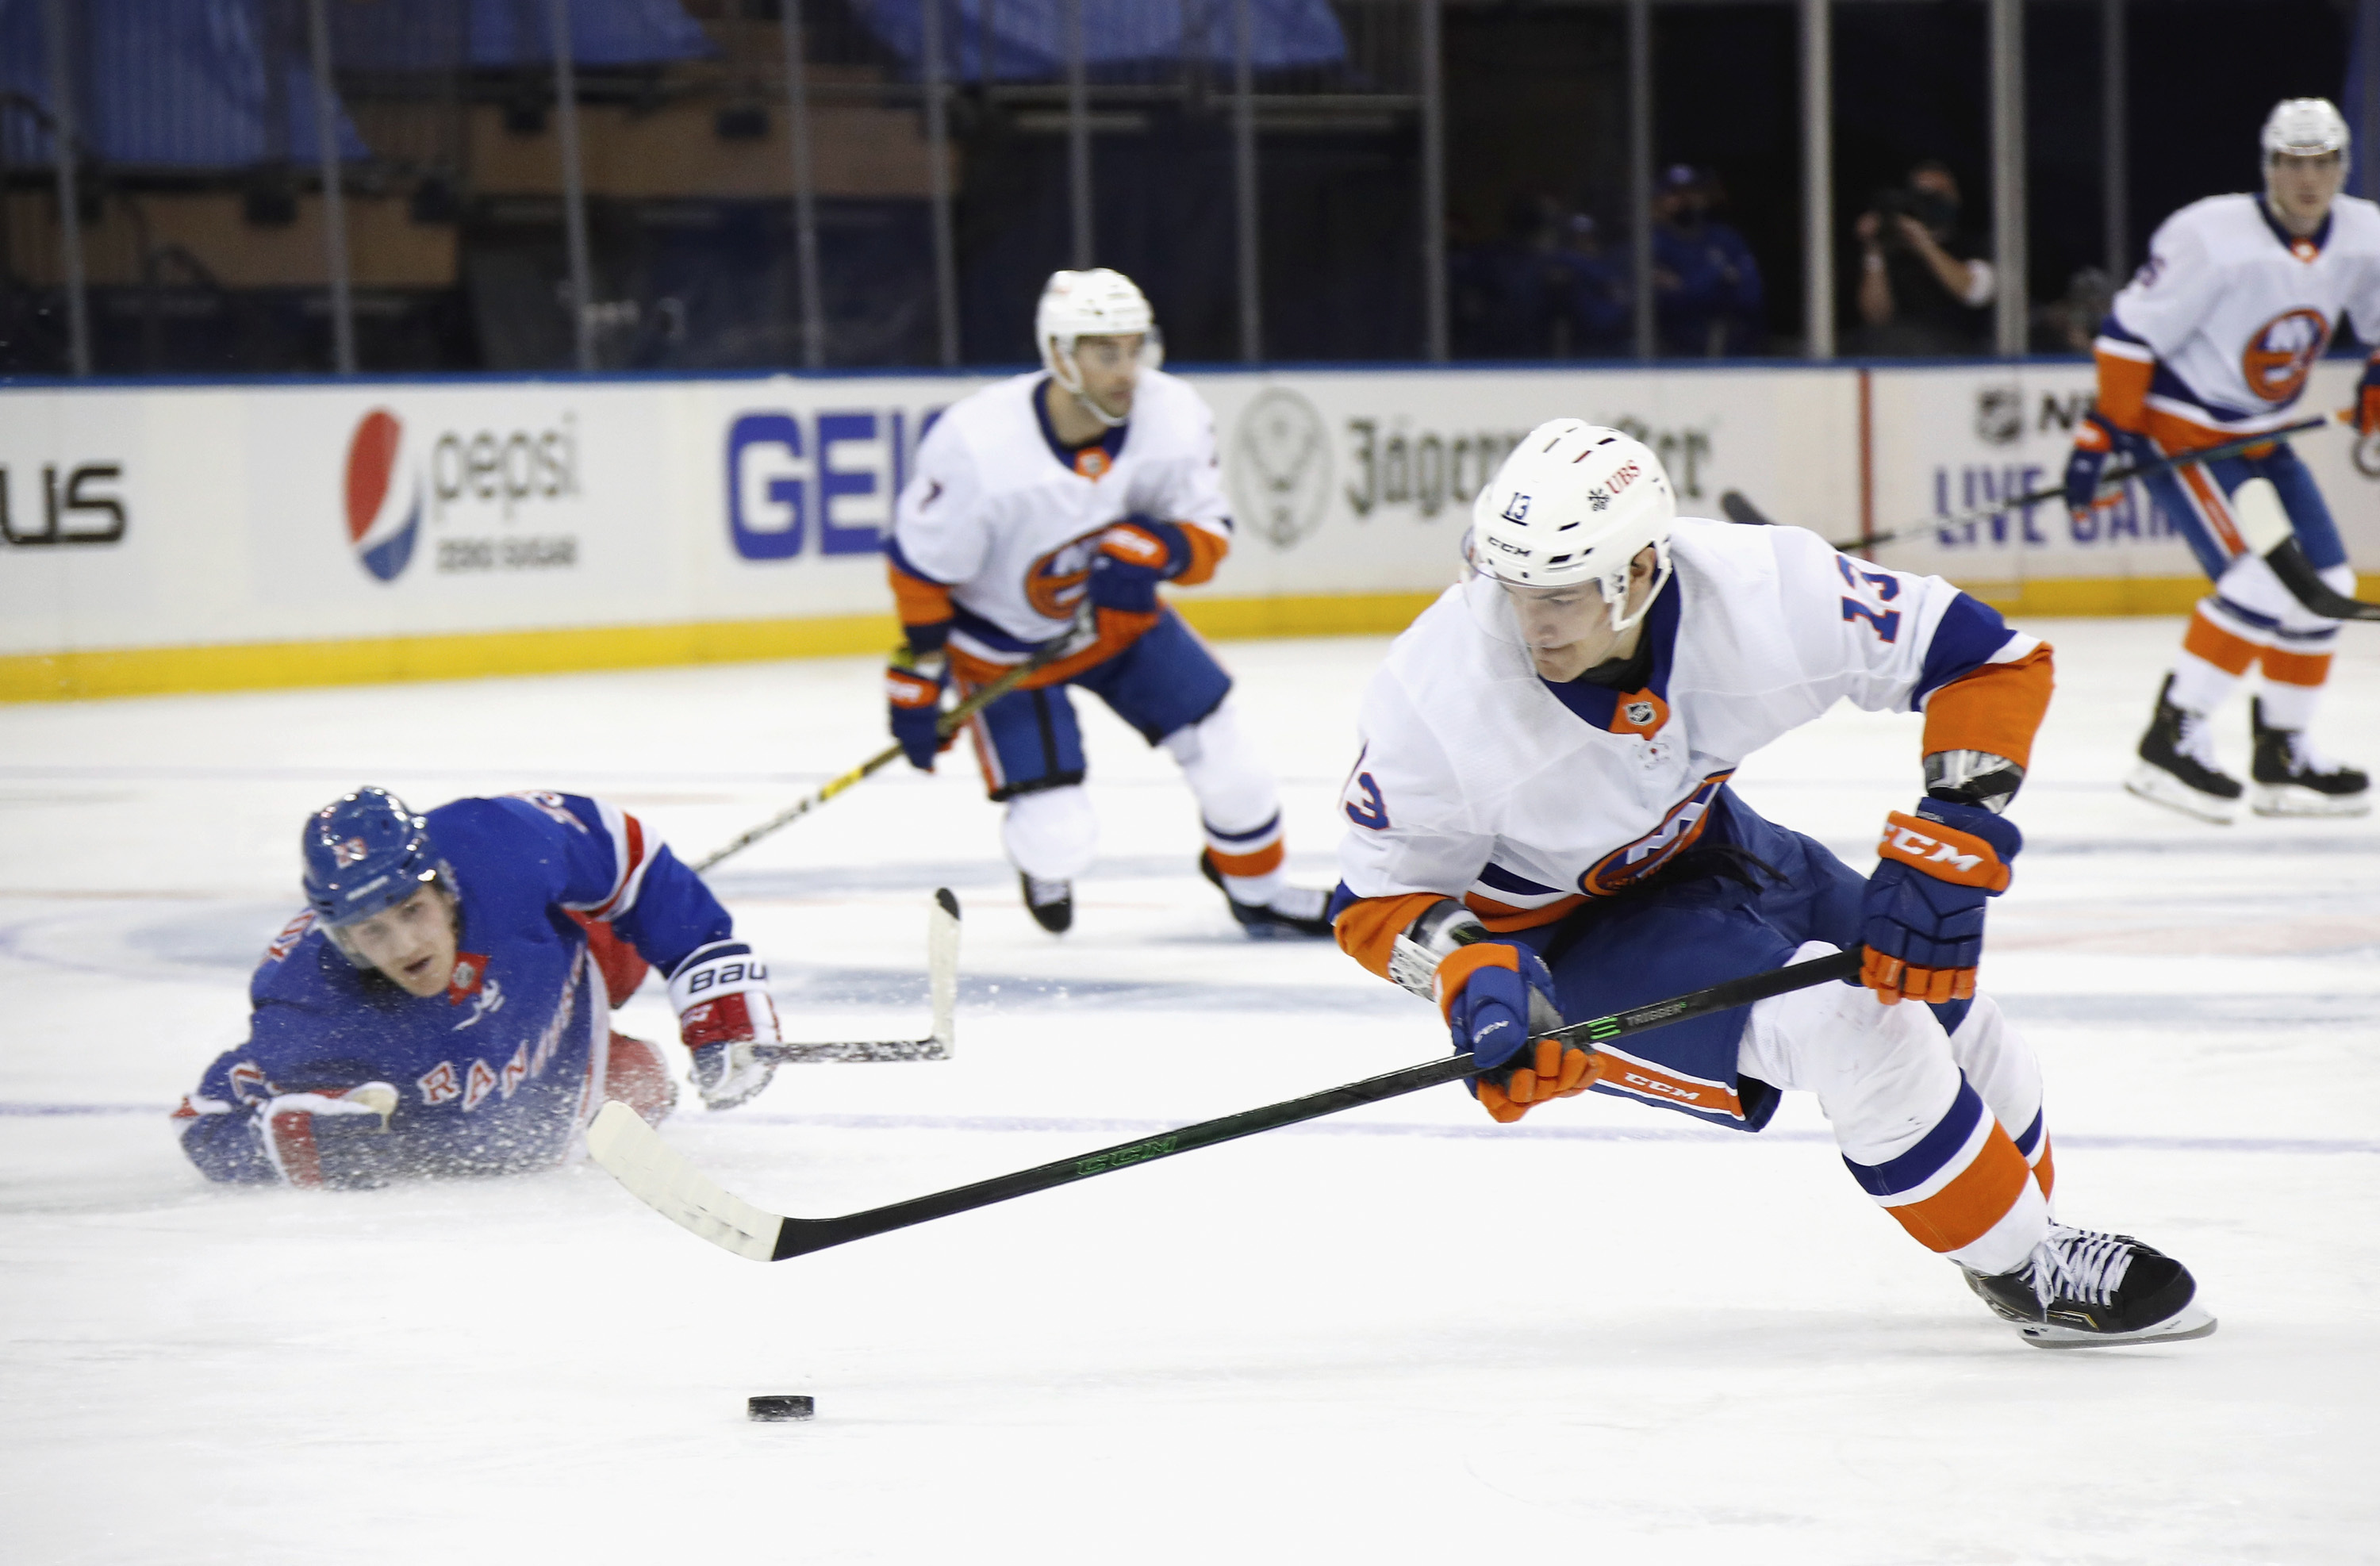 NHL How to LIVE STREAM FREE the Boston Bruins at New York Islanders Monday (1-18-21)